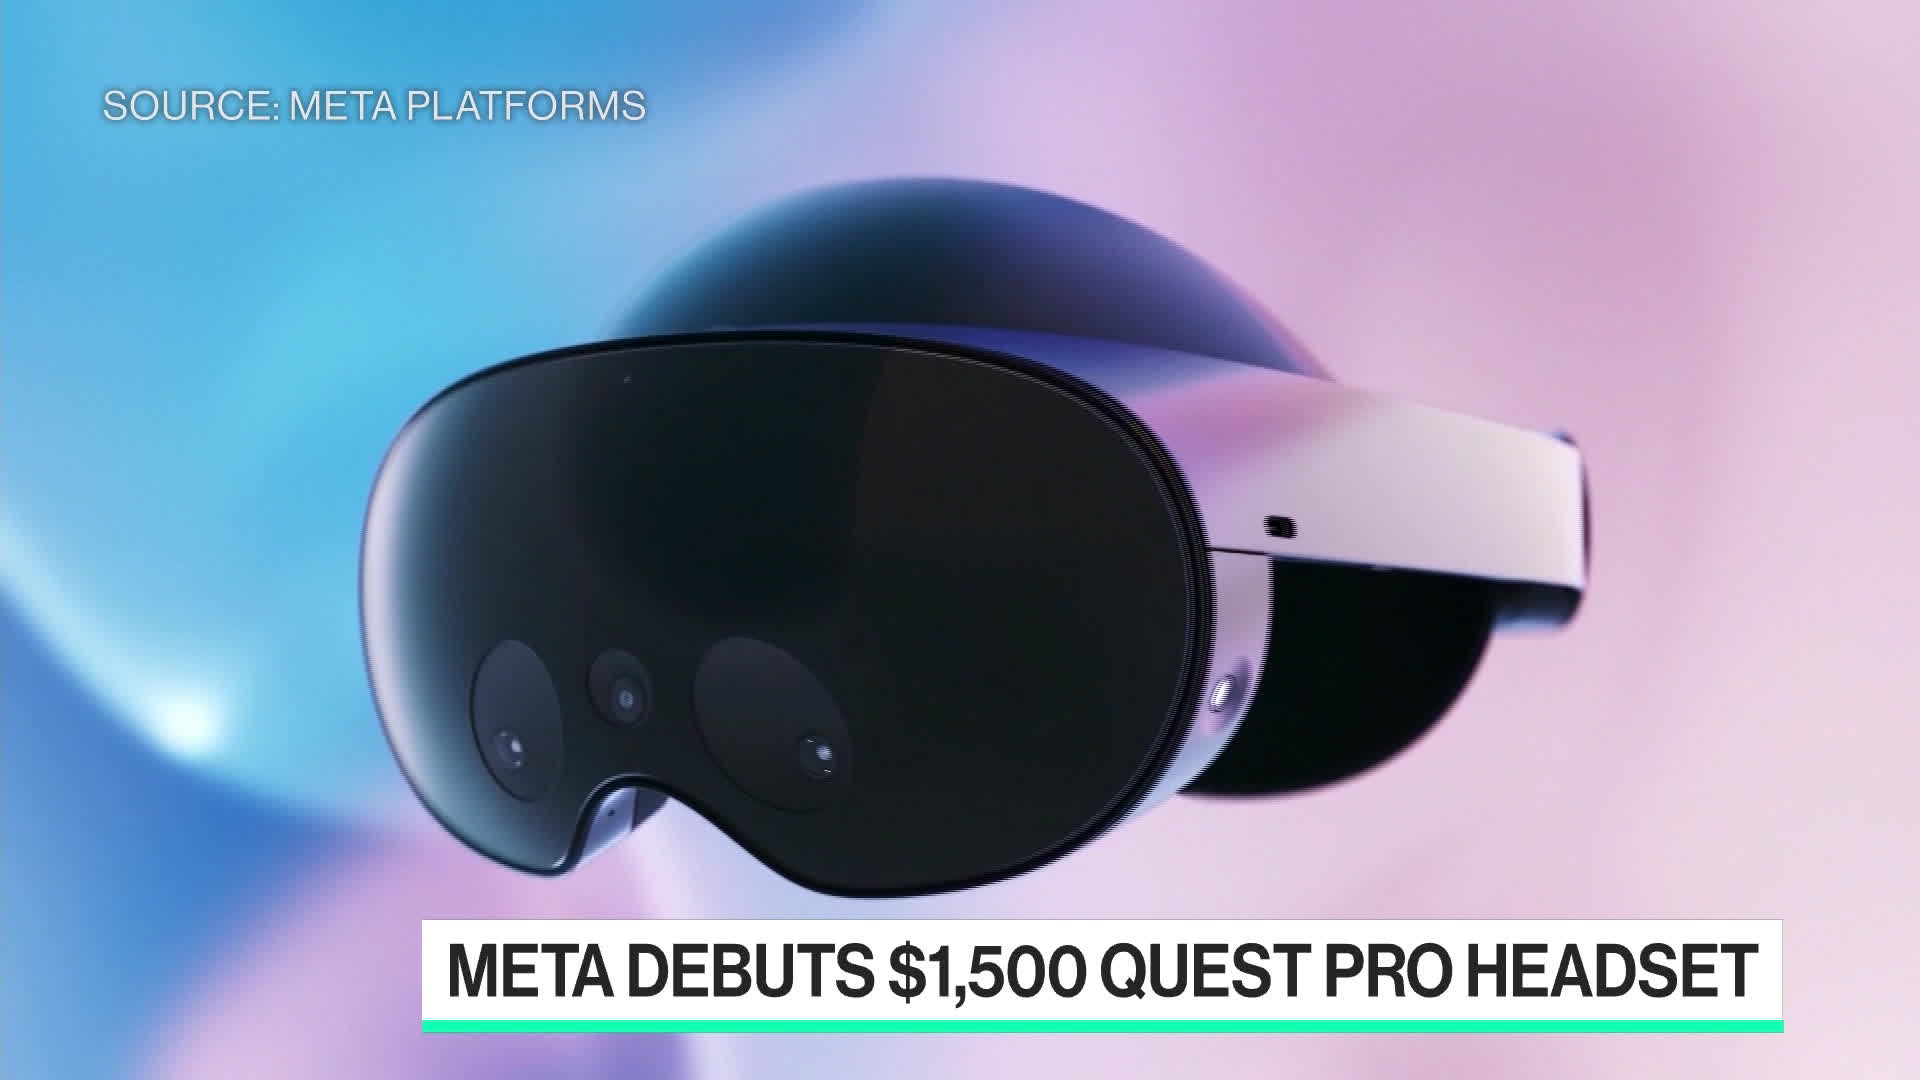 Meta Hikes VR Headset Prices About $100 as Production Costs Grow - Bloomberg